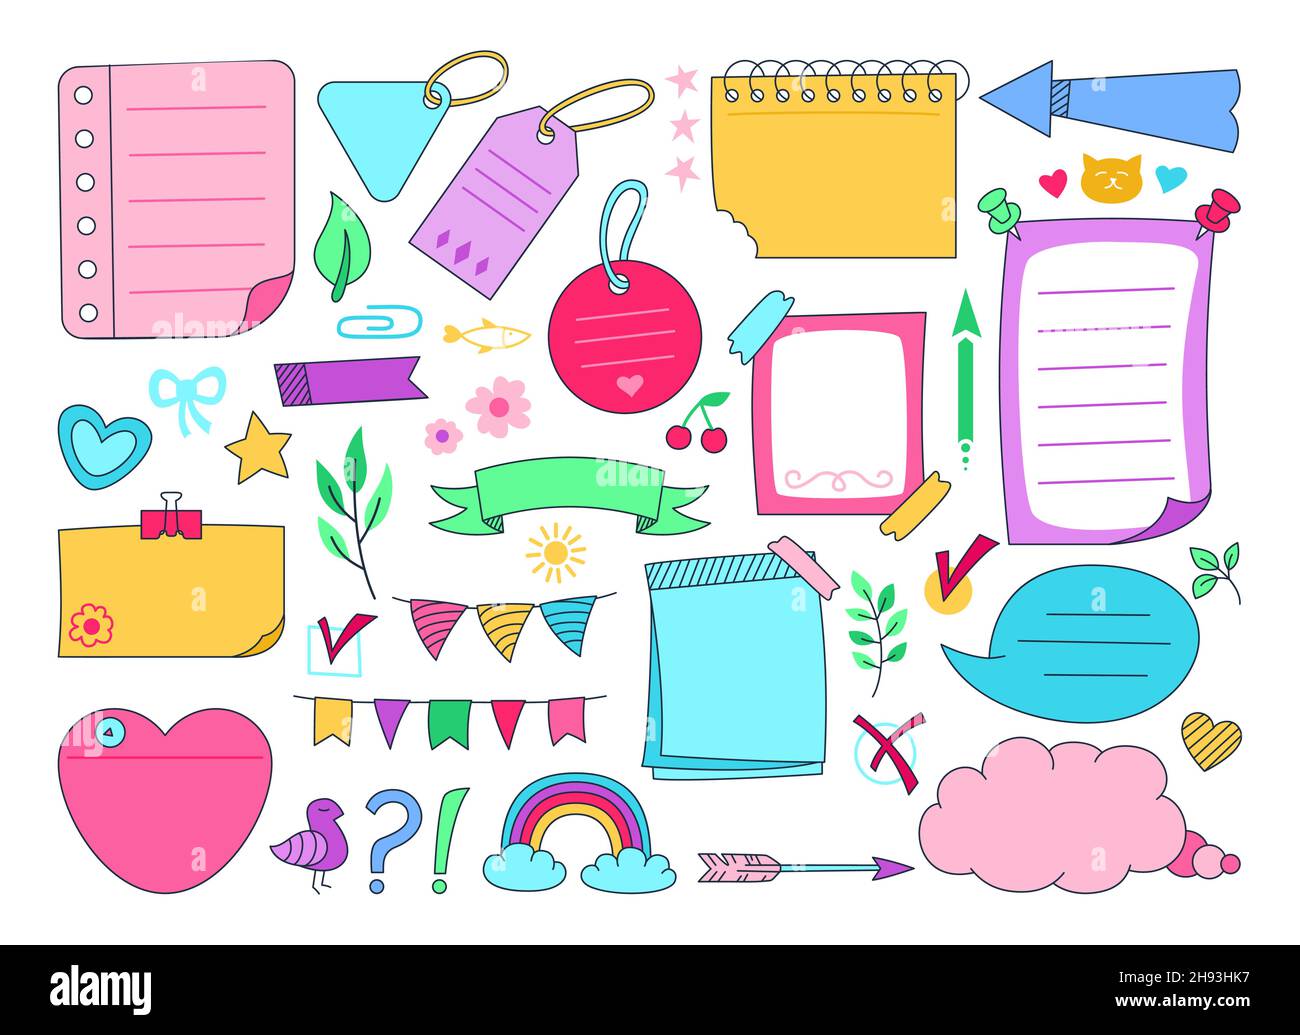 https://c8.alamy.com/comp/2H93HK7/sketch-sticky-notebook-note-paper-doodle-set-notes-with-elements-planning-speech-bubble-frame-rainbow-blank-graphic-notepad-or-label-tag-organized-education-planner-bookmark-memory-diary-page-2H93HK7.jpg